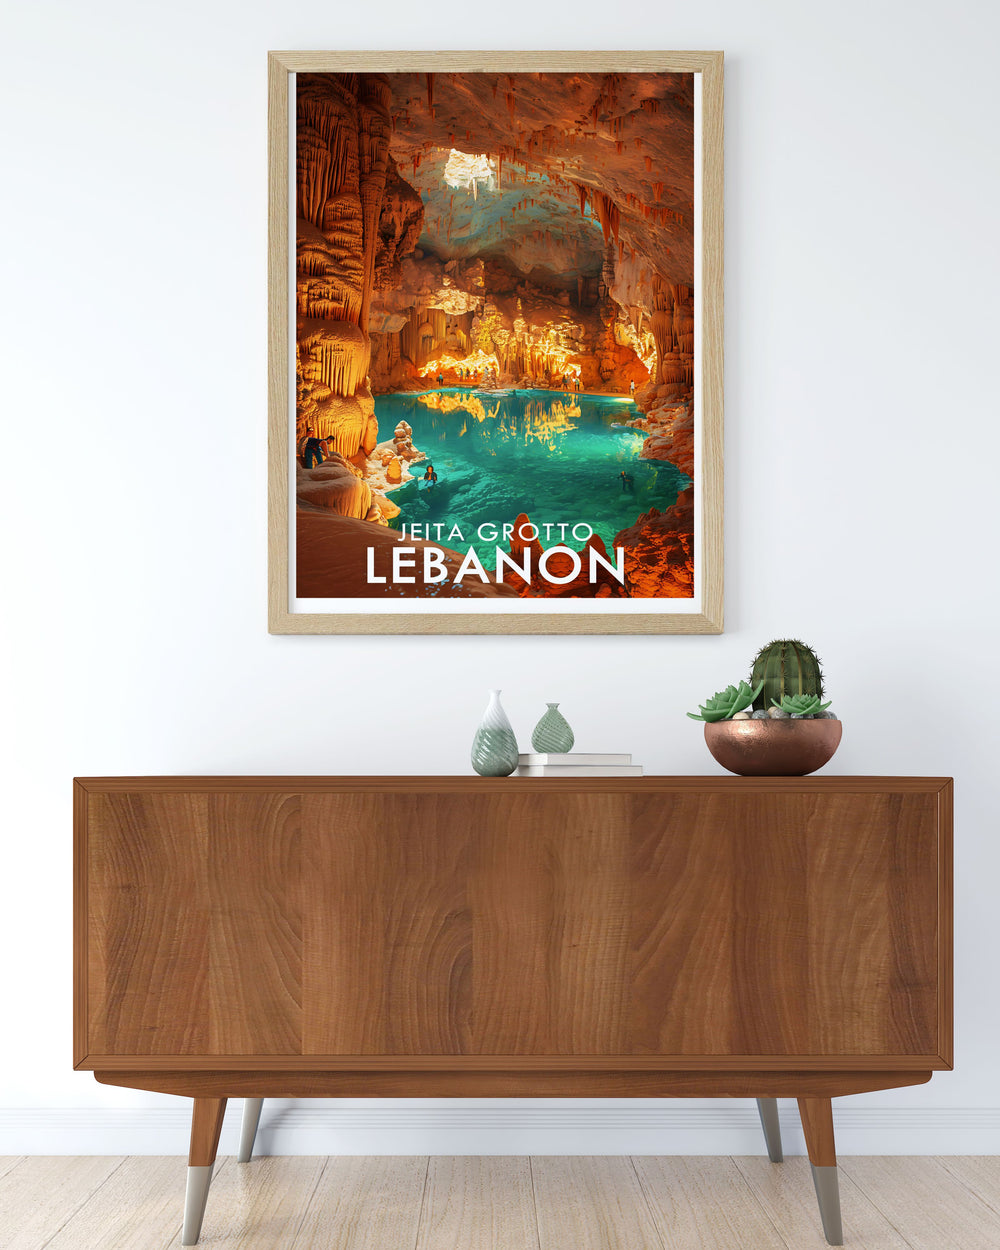 Beirut Poster featuring lively streets and coastal views of Lebanon with Jeita Grotto wall art depicting natural beauty and awe inspiring formations ideal for transforming any living space with elegant art